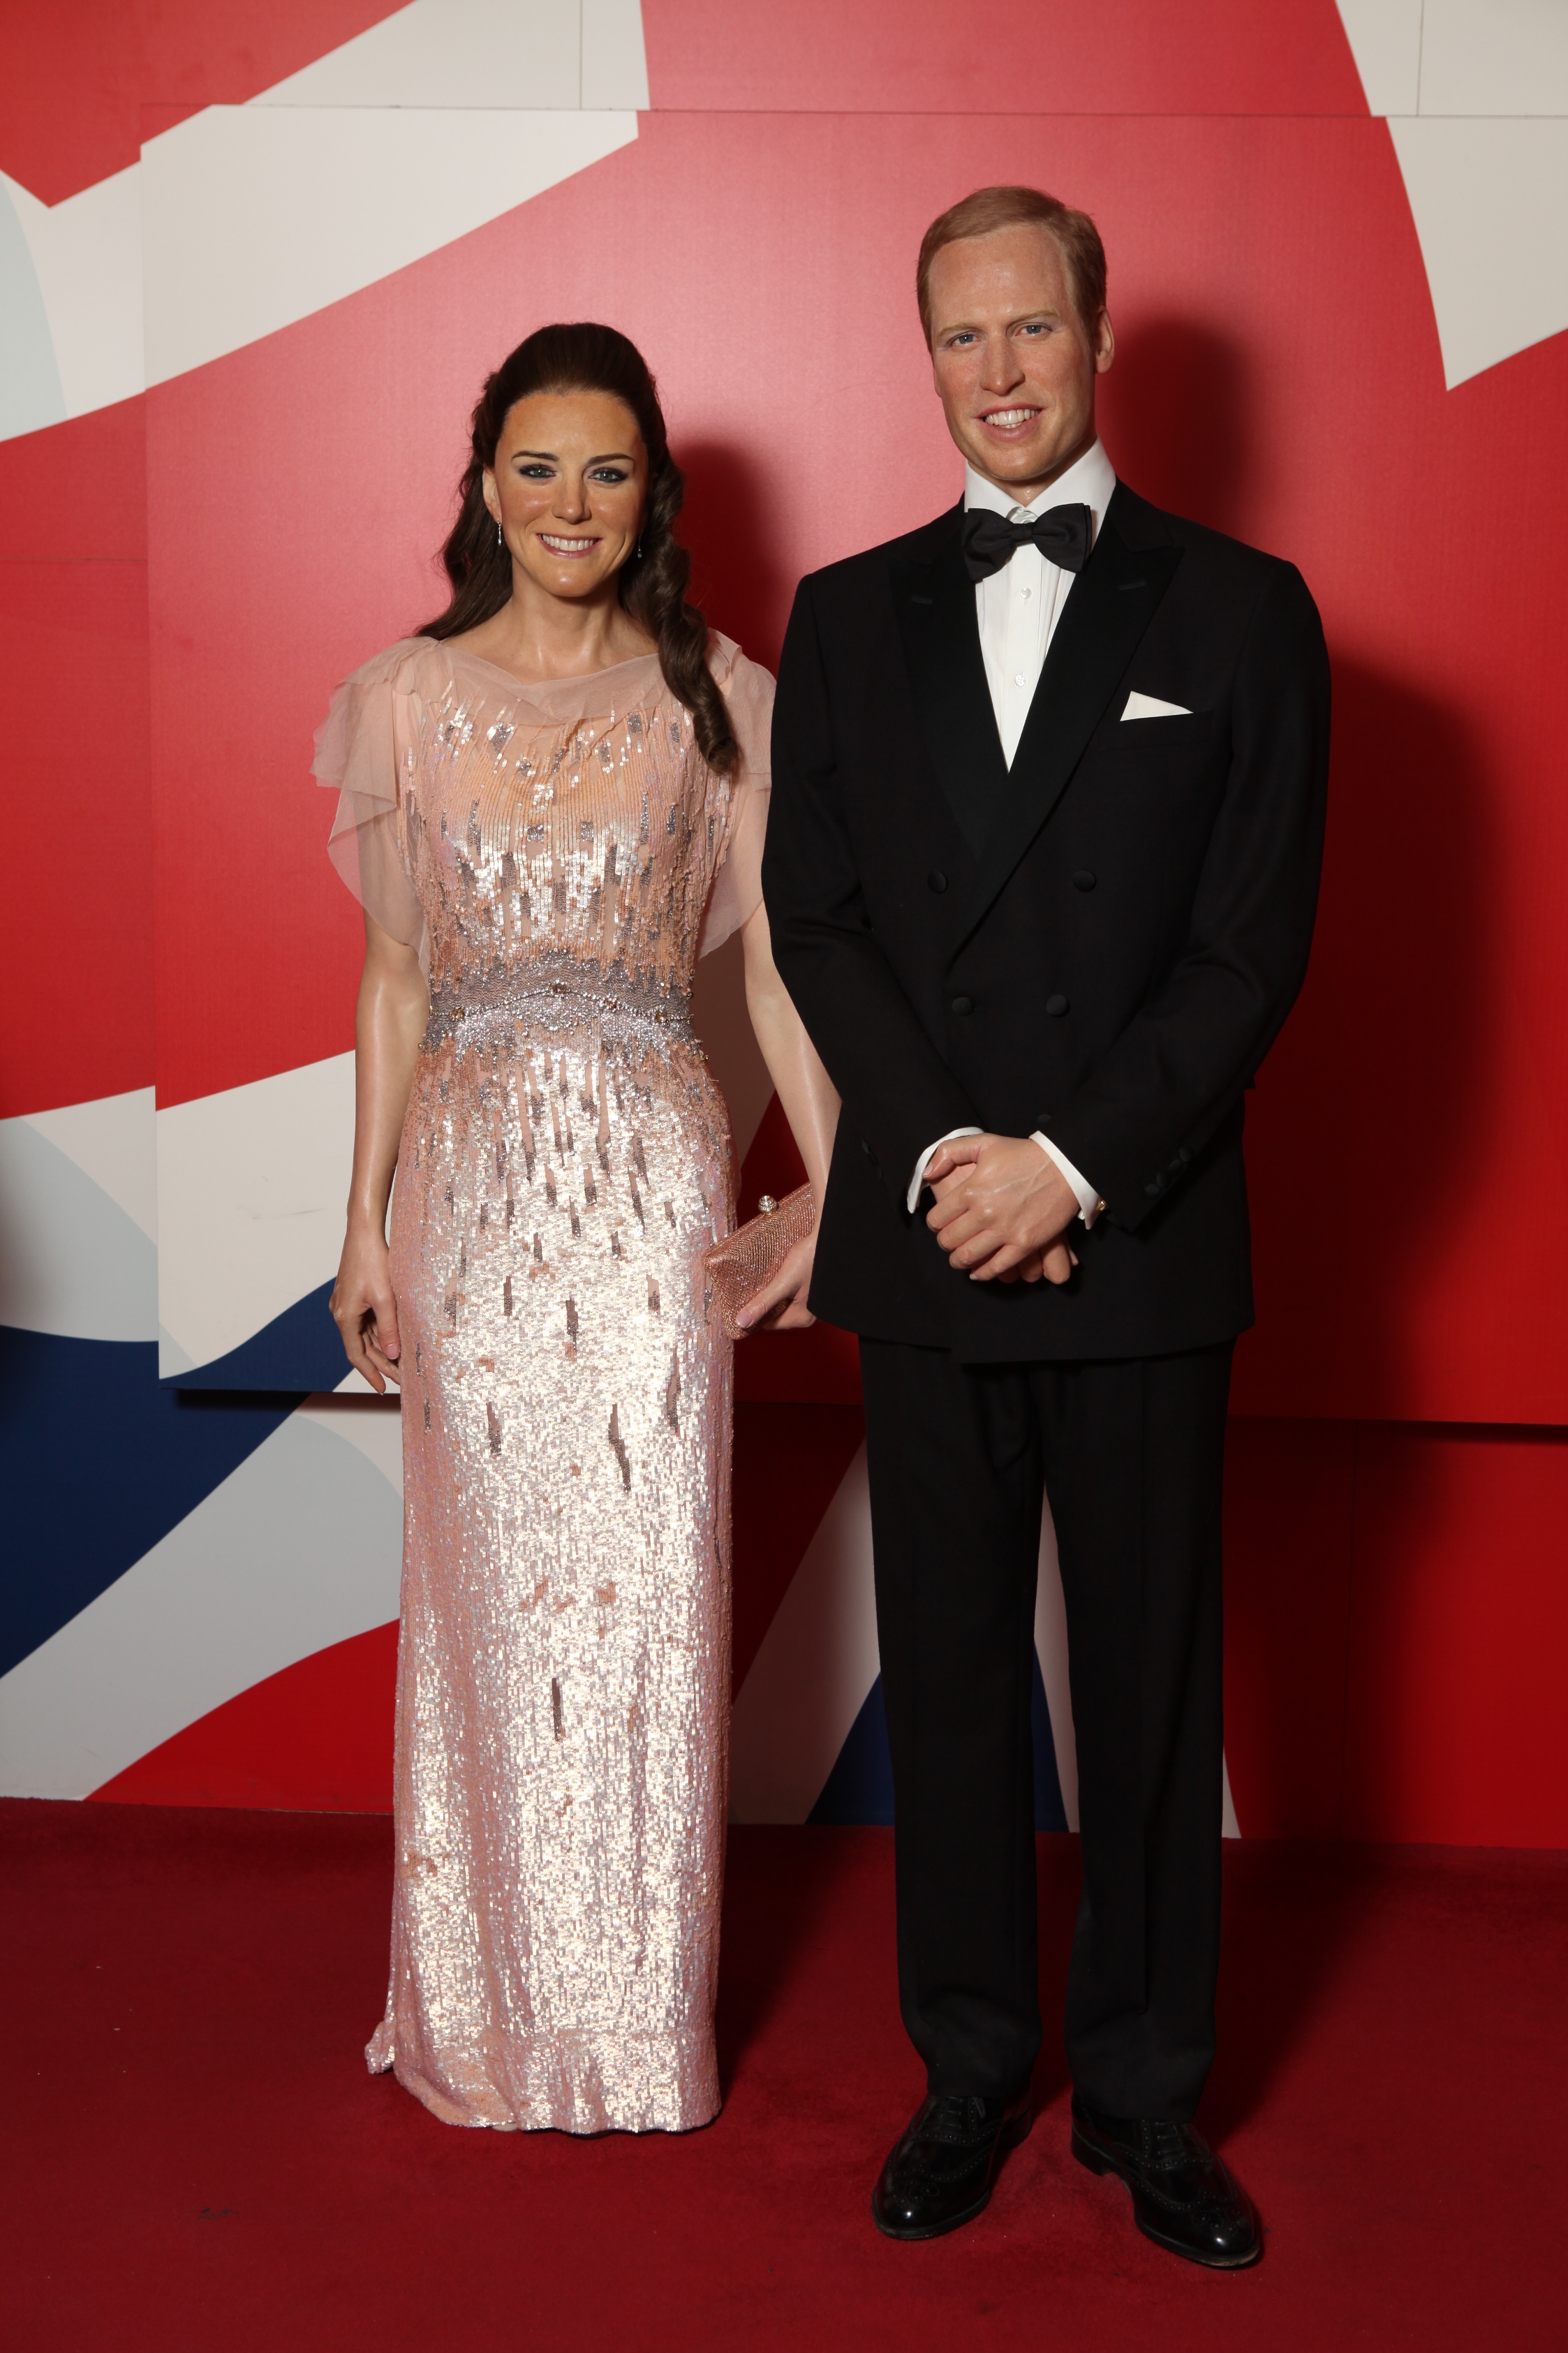 The Duke and Duchess of Cambridge wax figures at Madame Tussauds Blackpool